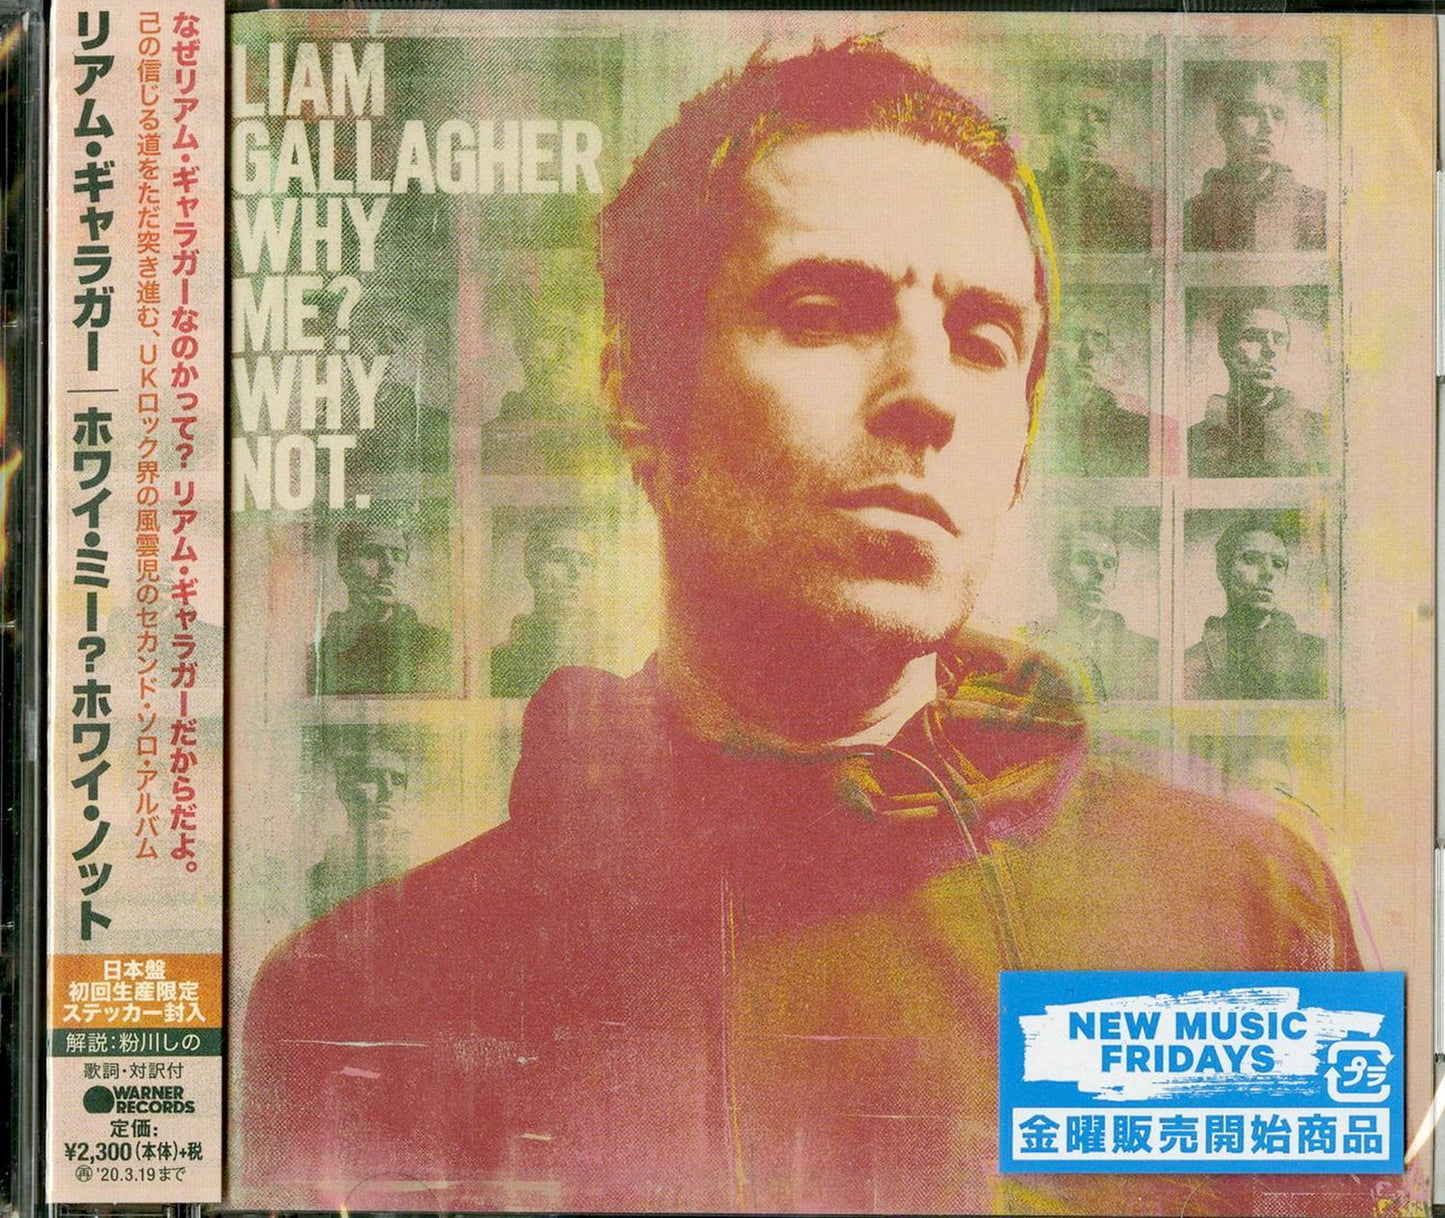 Liam Gallagher - Why Me? Why Not - Japan CD